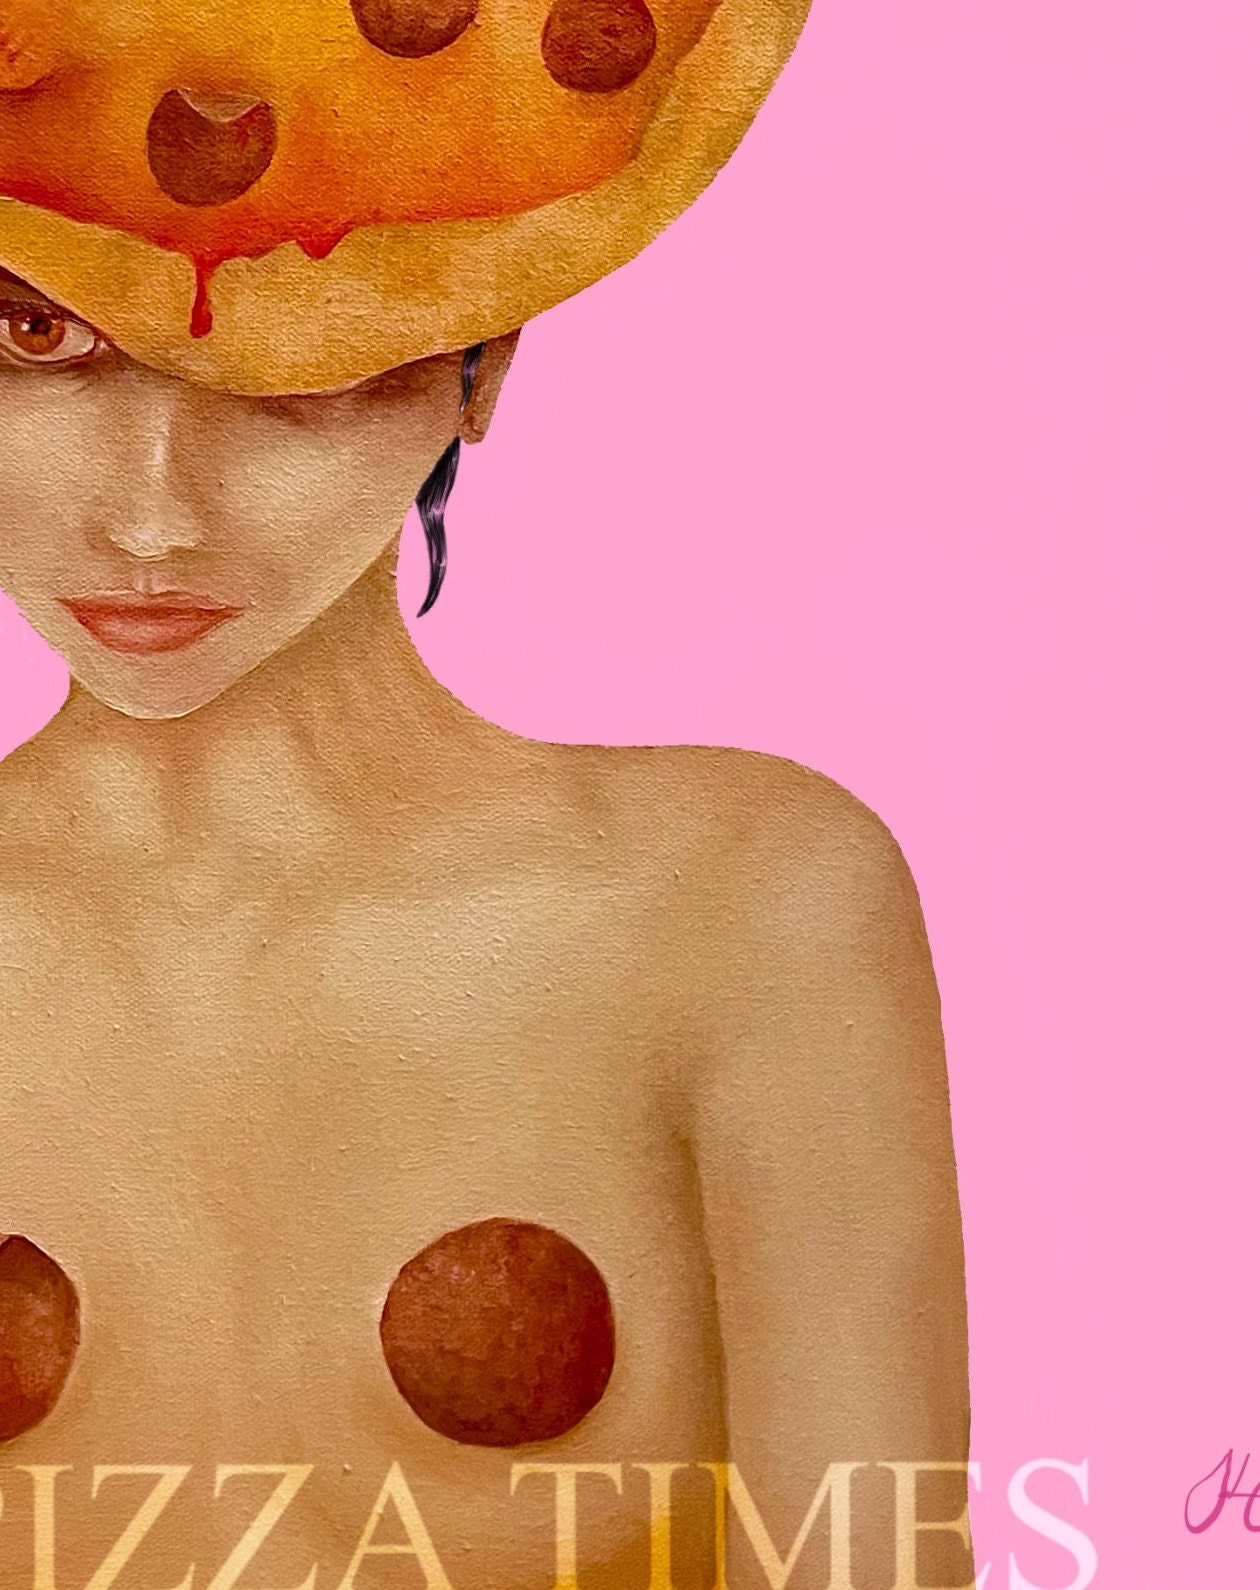 chrissy walczak recommends What Are Pepperoni Nipples